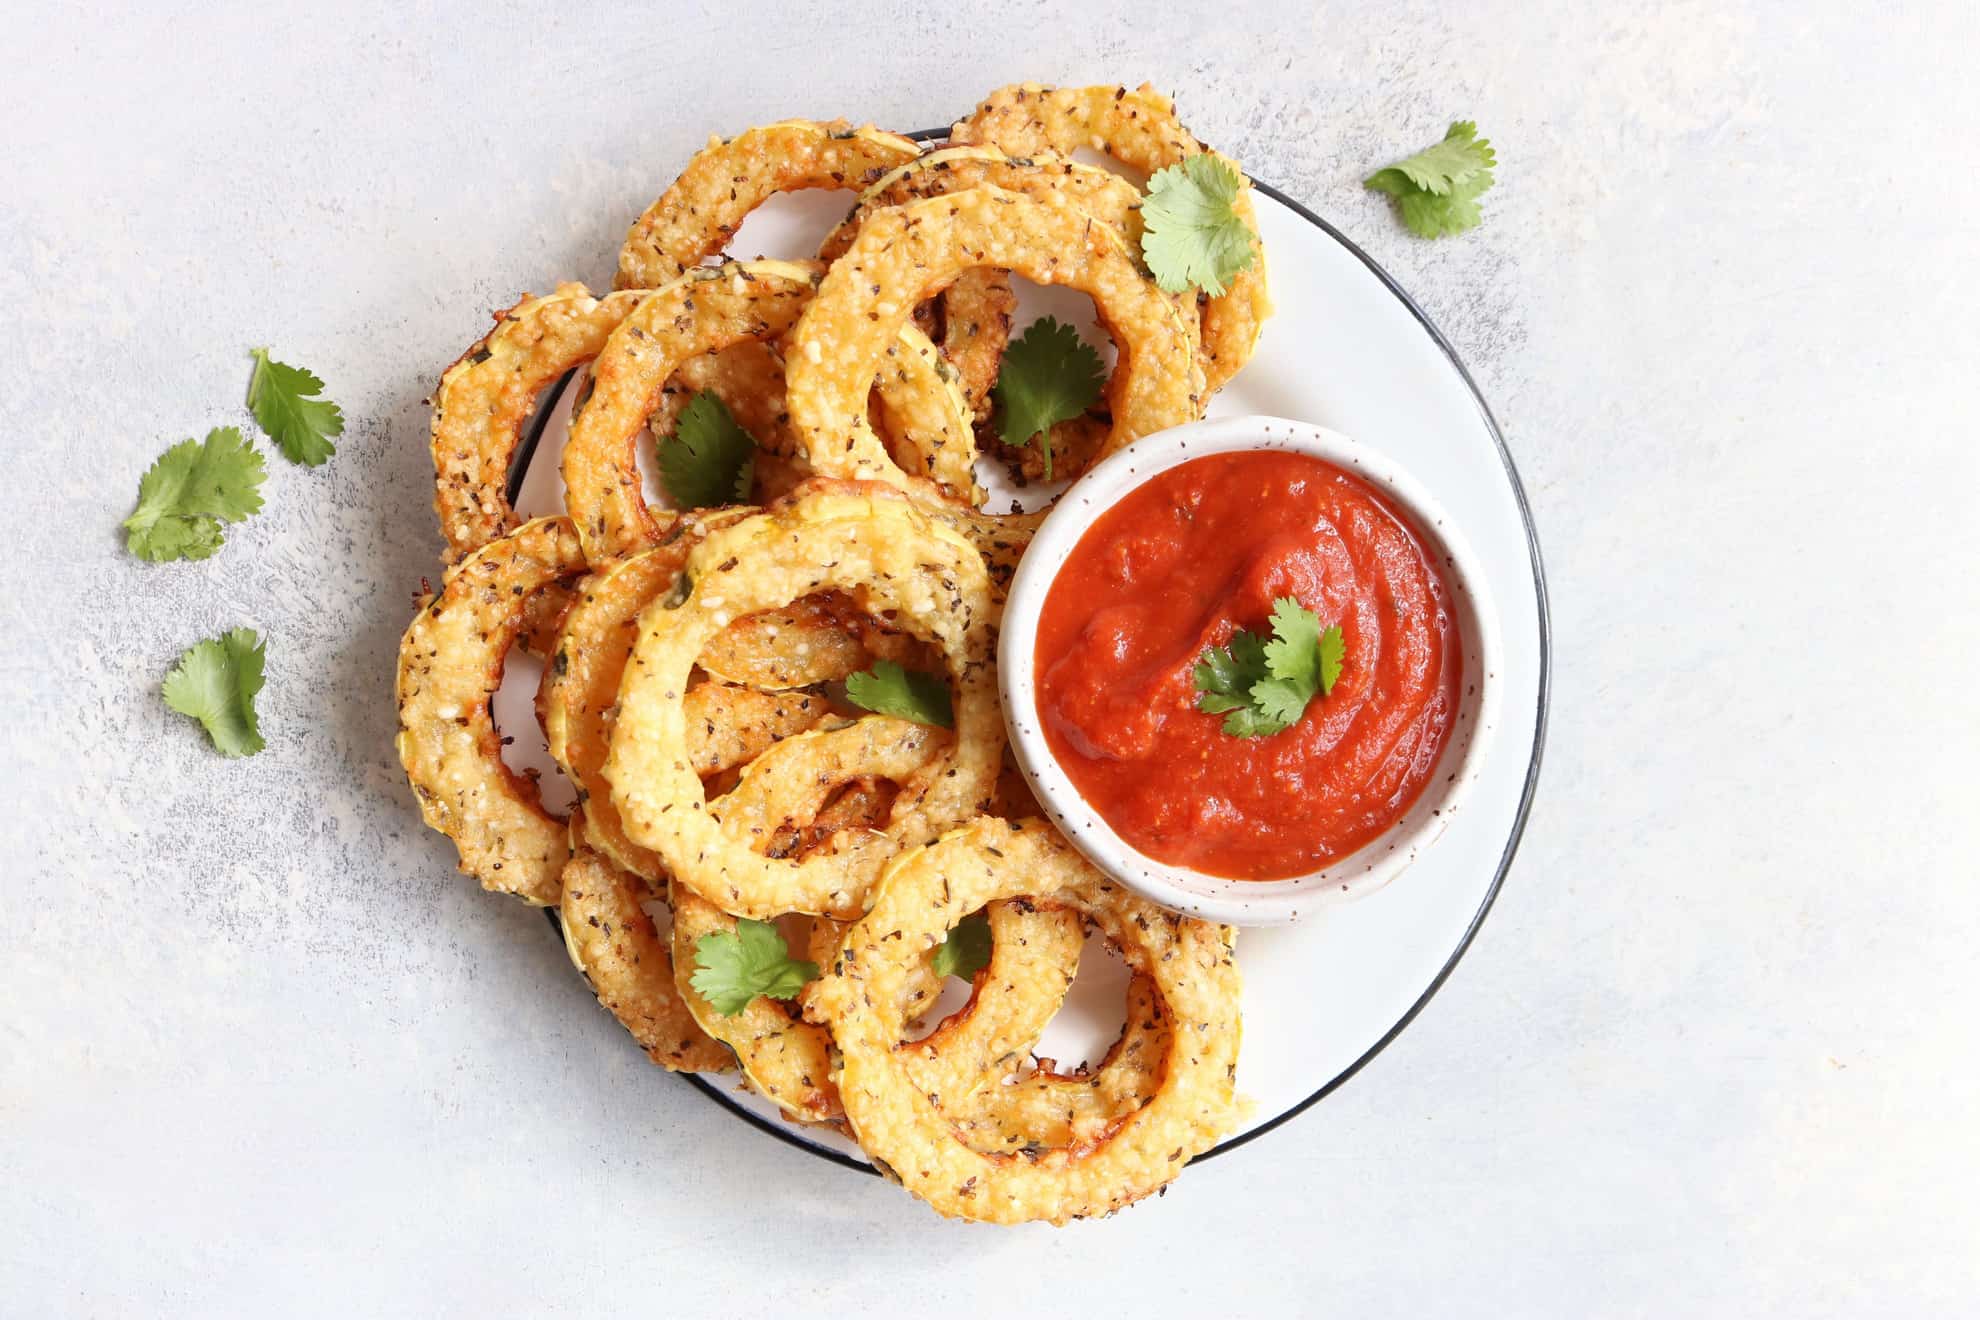 plate with Parmesan Crusted Delicata Squash rings with a small bowl of marinara sauce and some fresh herbs sprinkled on top on a white background